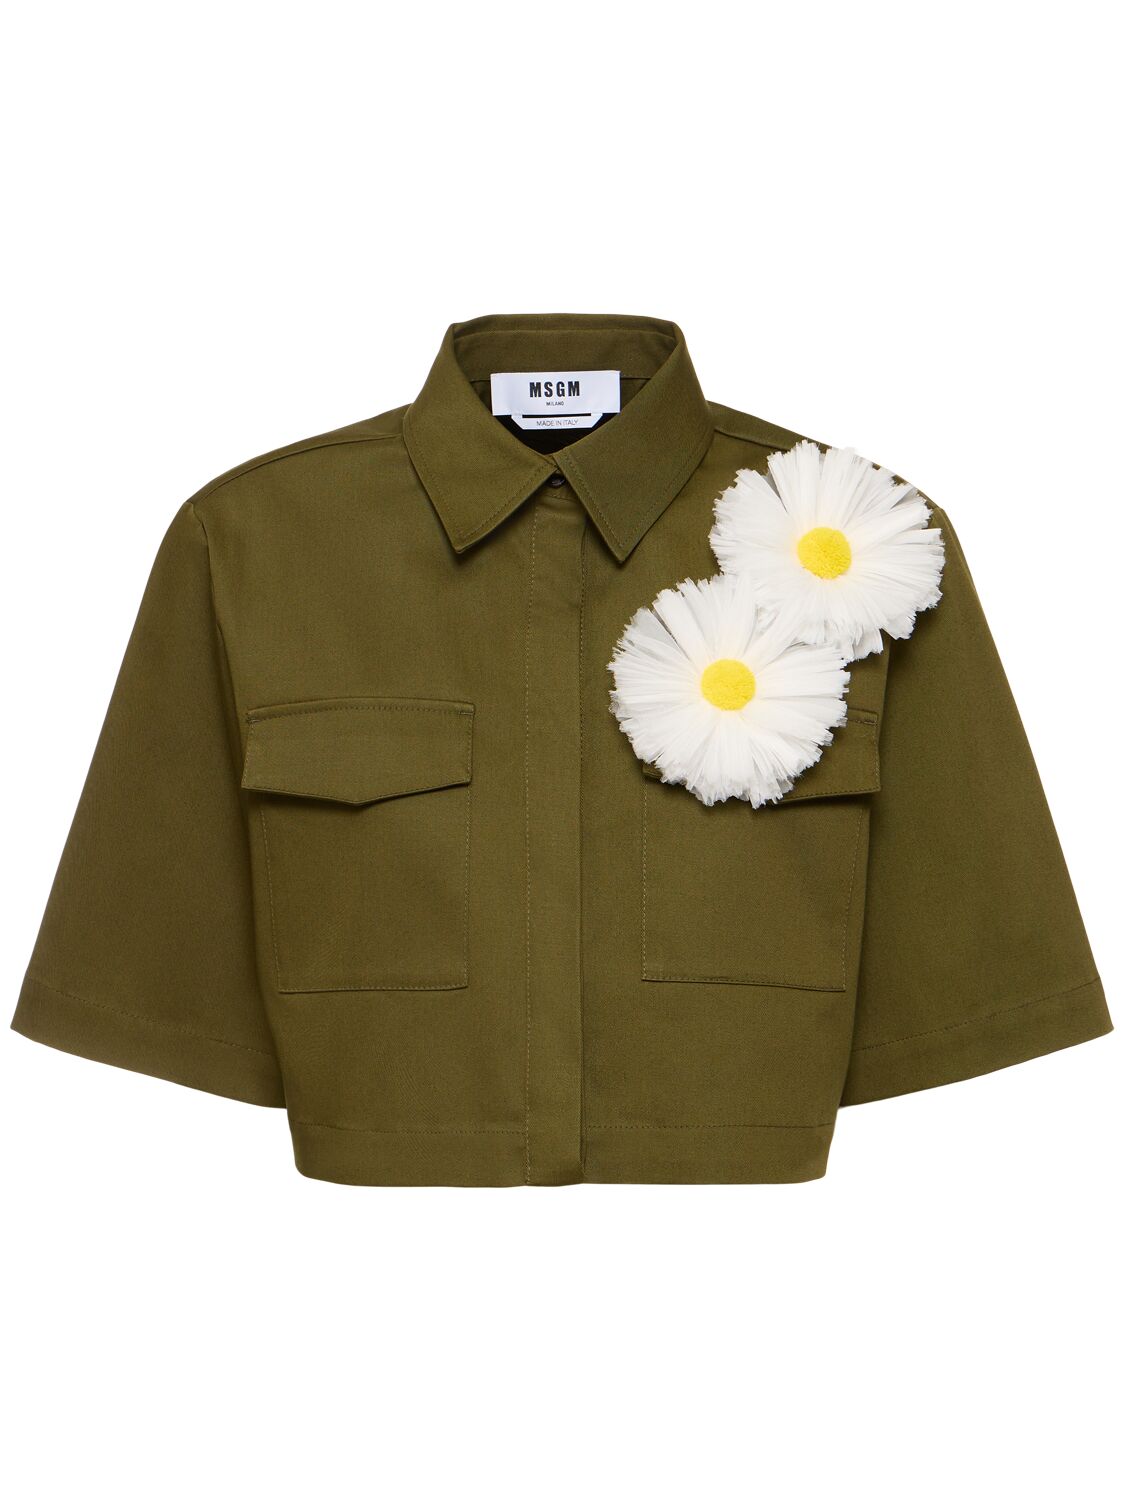 Msgm Cotton Blend Crop Shirt In Military Green